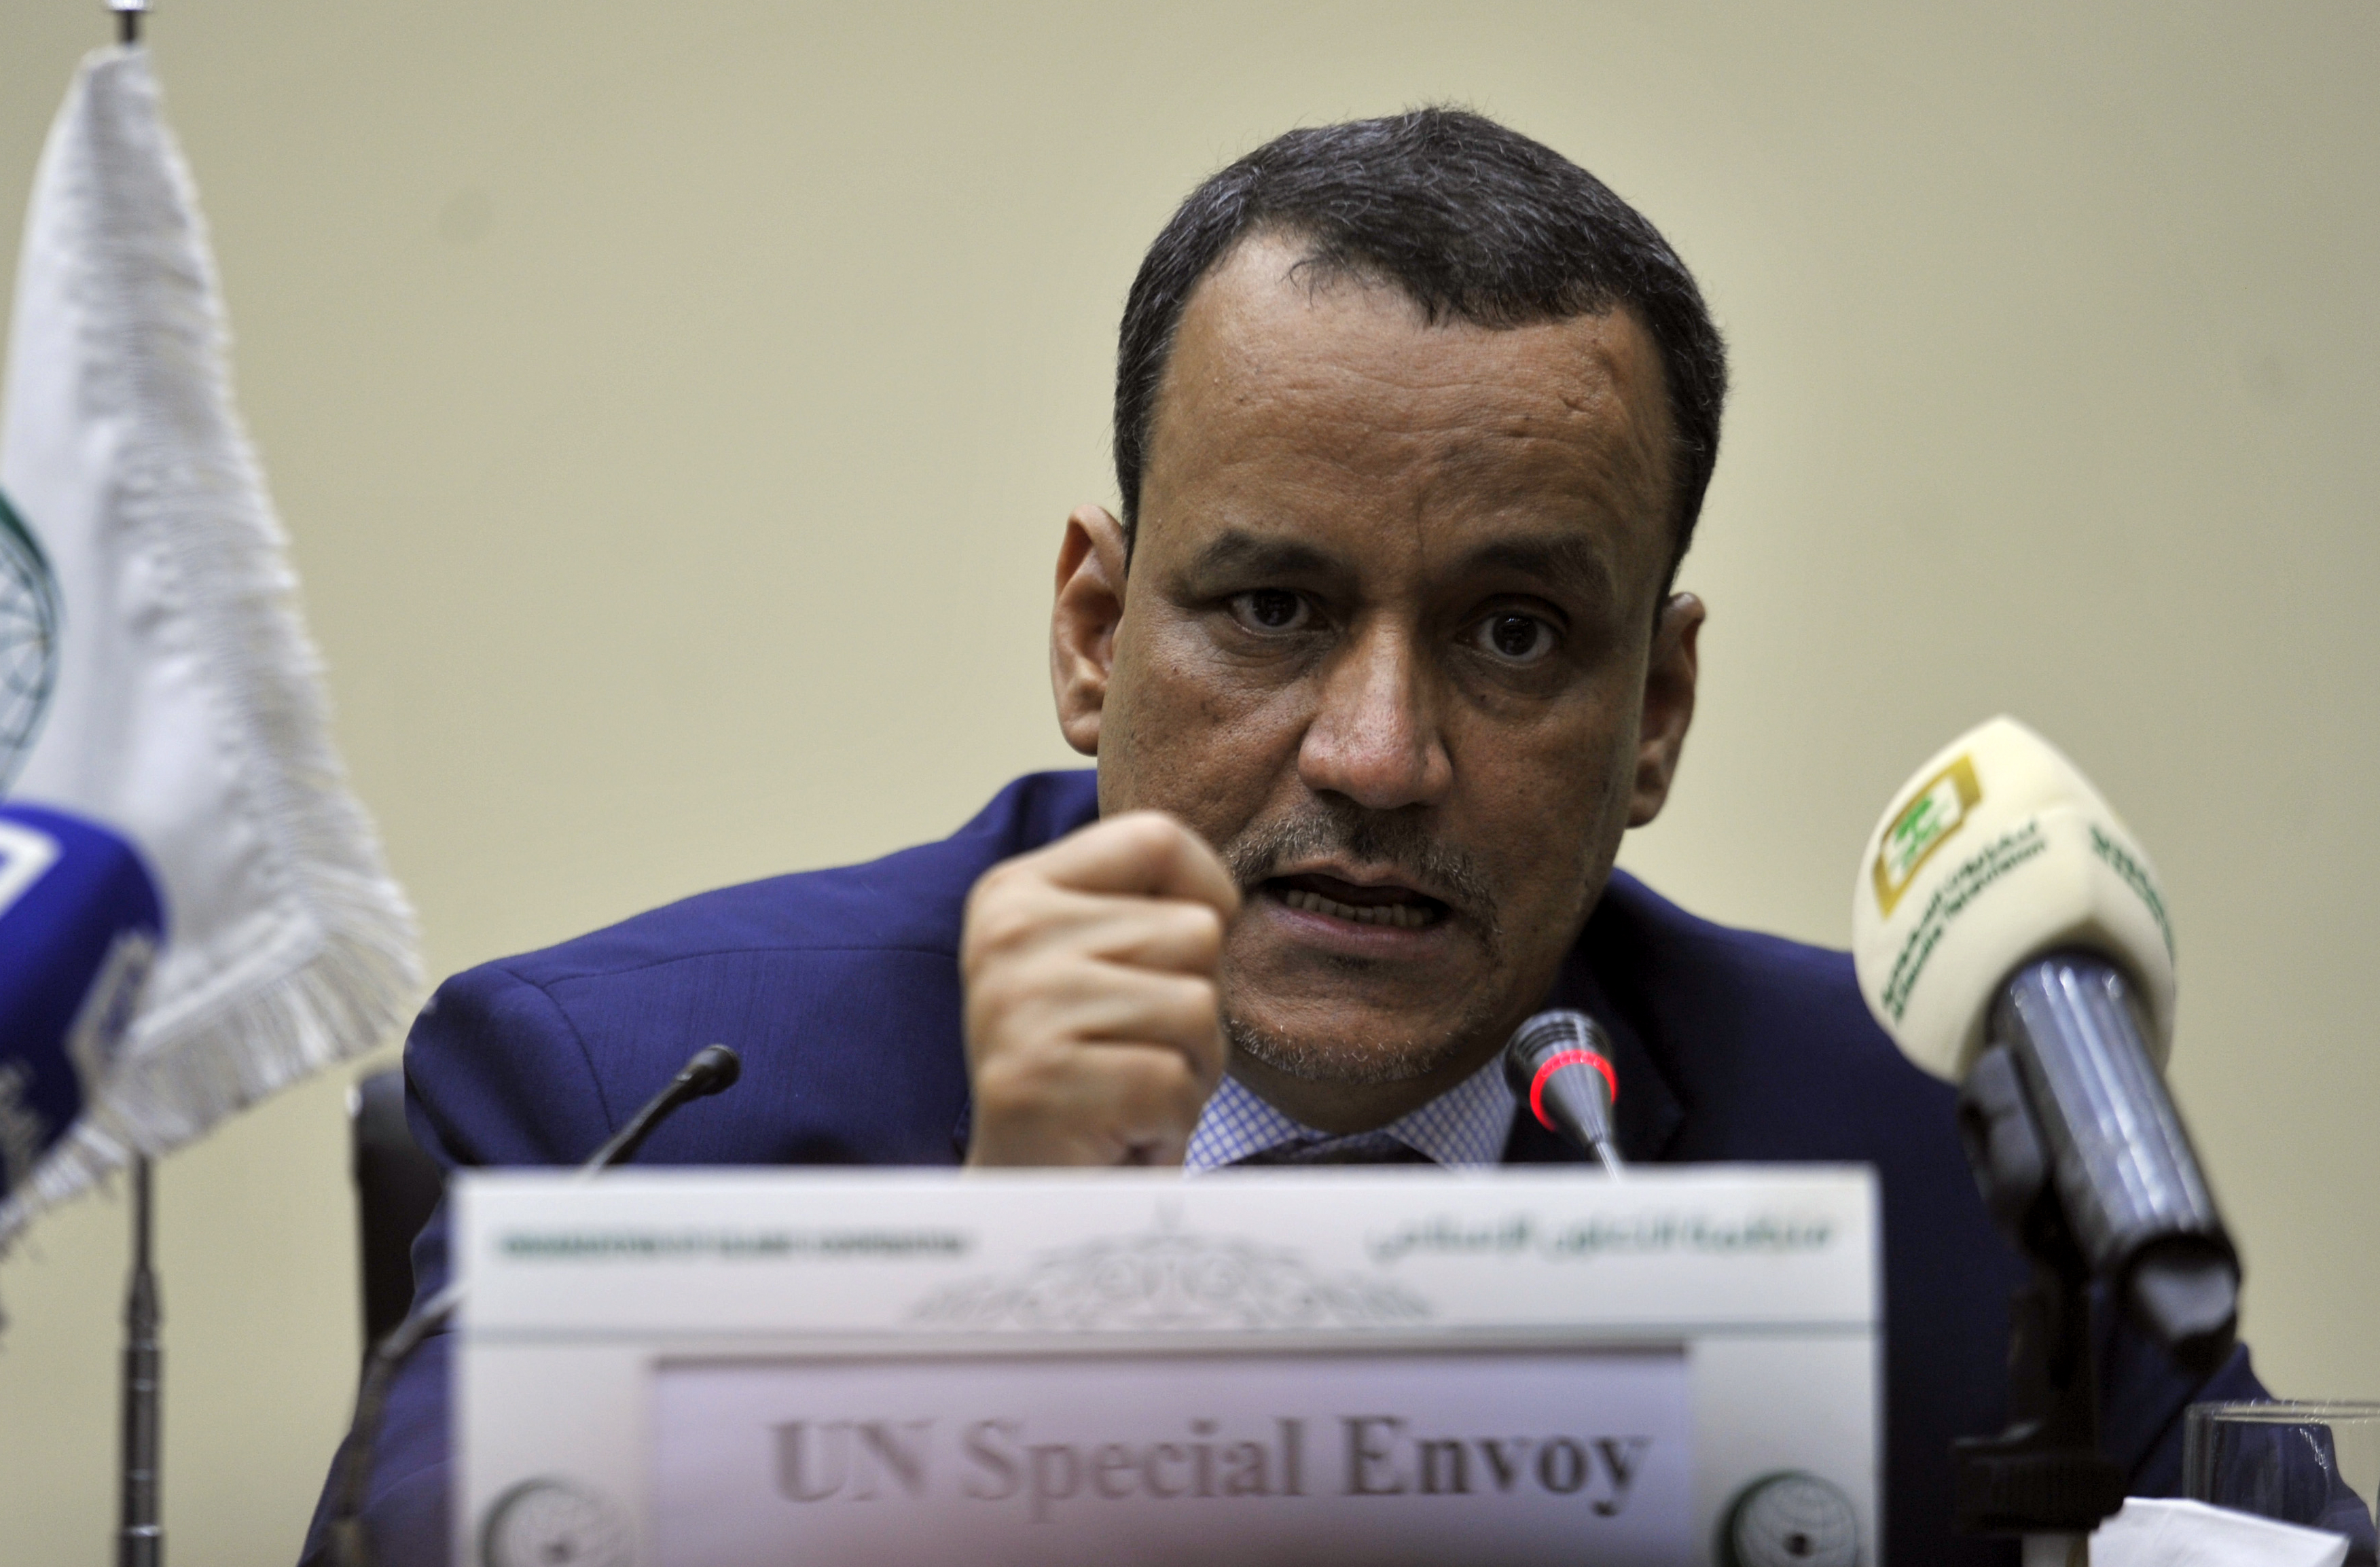 United Nations Special Envoy for Yemen Ismail Ould Cheikh Ahmed speaks during a press conference with the secretary general of the Organization of Islamic Cooperation (OIC) in Jeddah on August 8, 2016. / AFP PHOTO / STRINGER